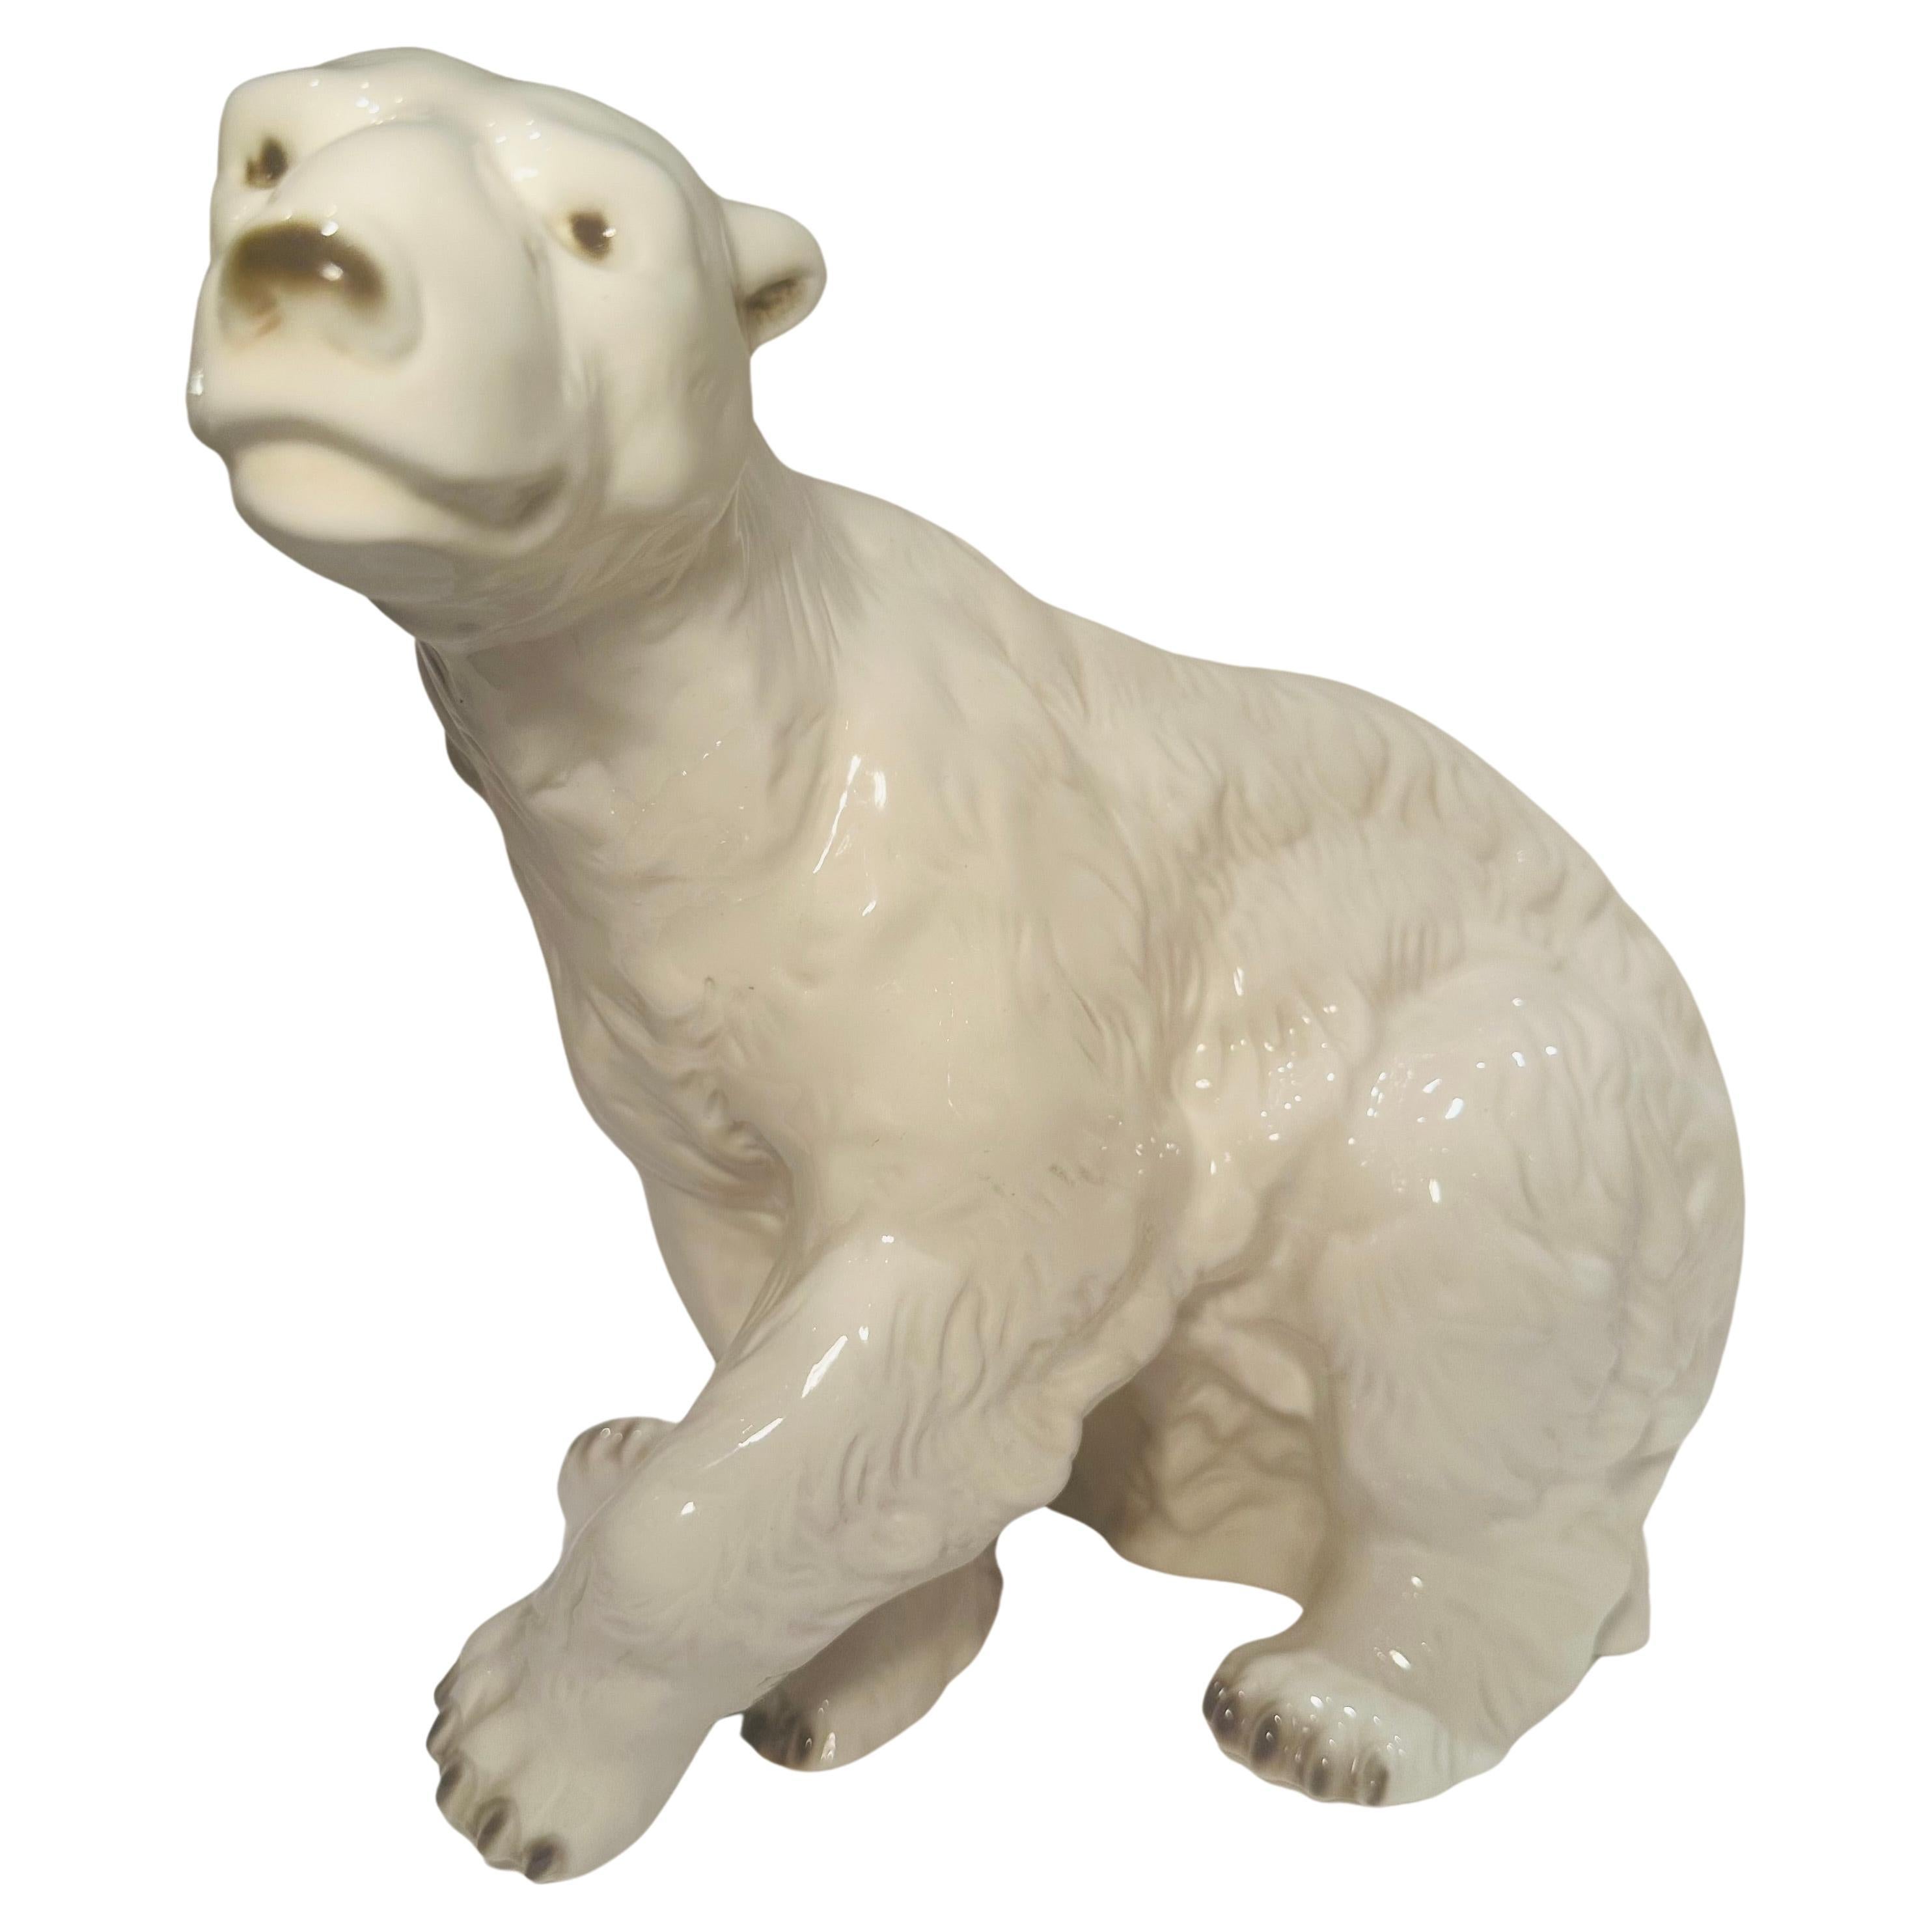 A Royal Dux large hand made and painted porcelain polar bear, 20th century, modeled seated with one paw raised, applied blue triangle mark. Hallmark on bottom indicates circa 1918-1945.

Measures approximately 10.5